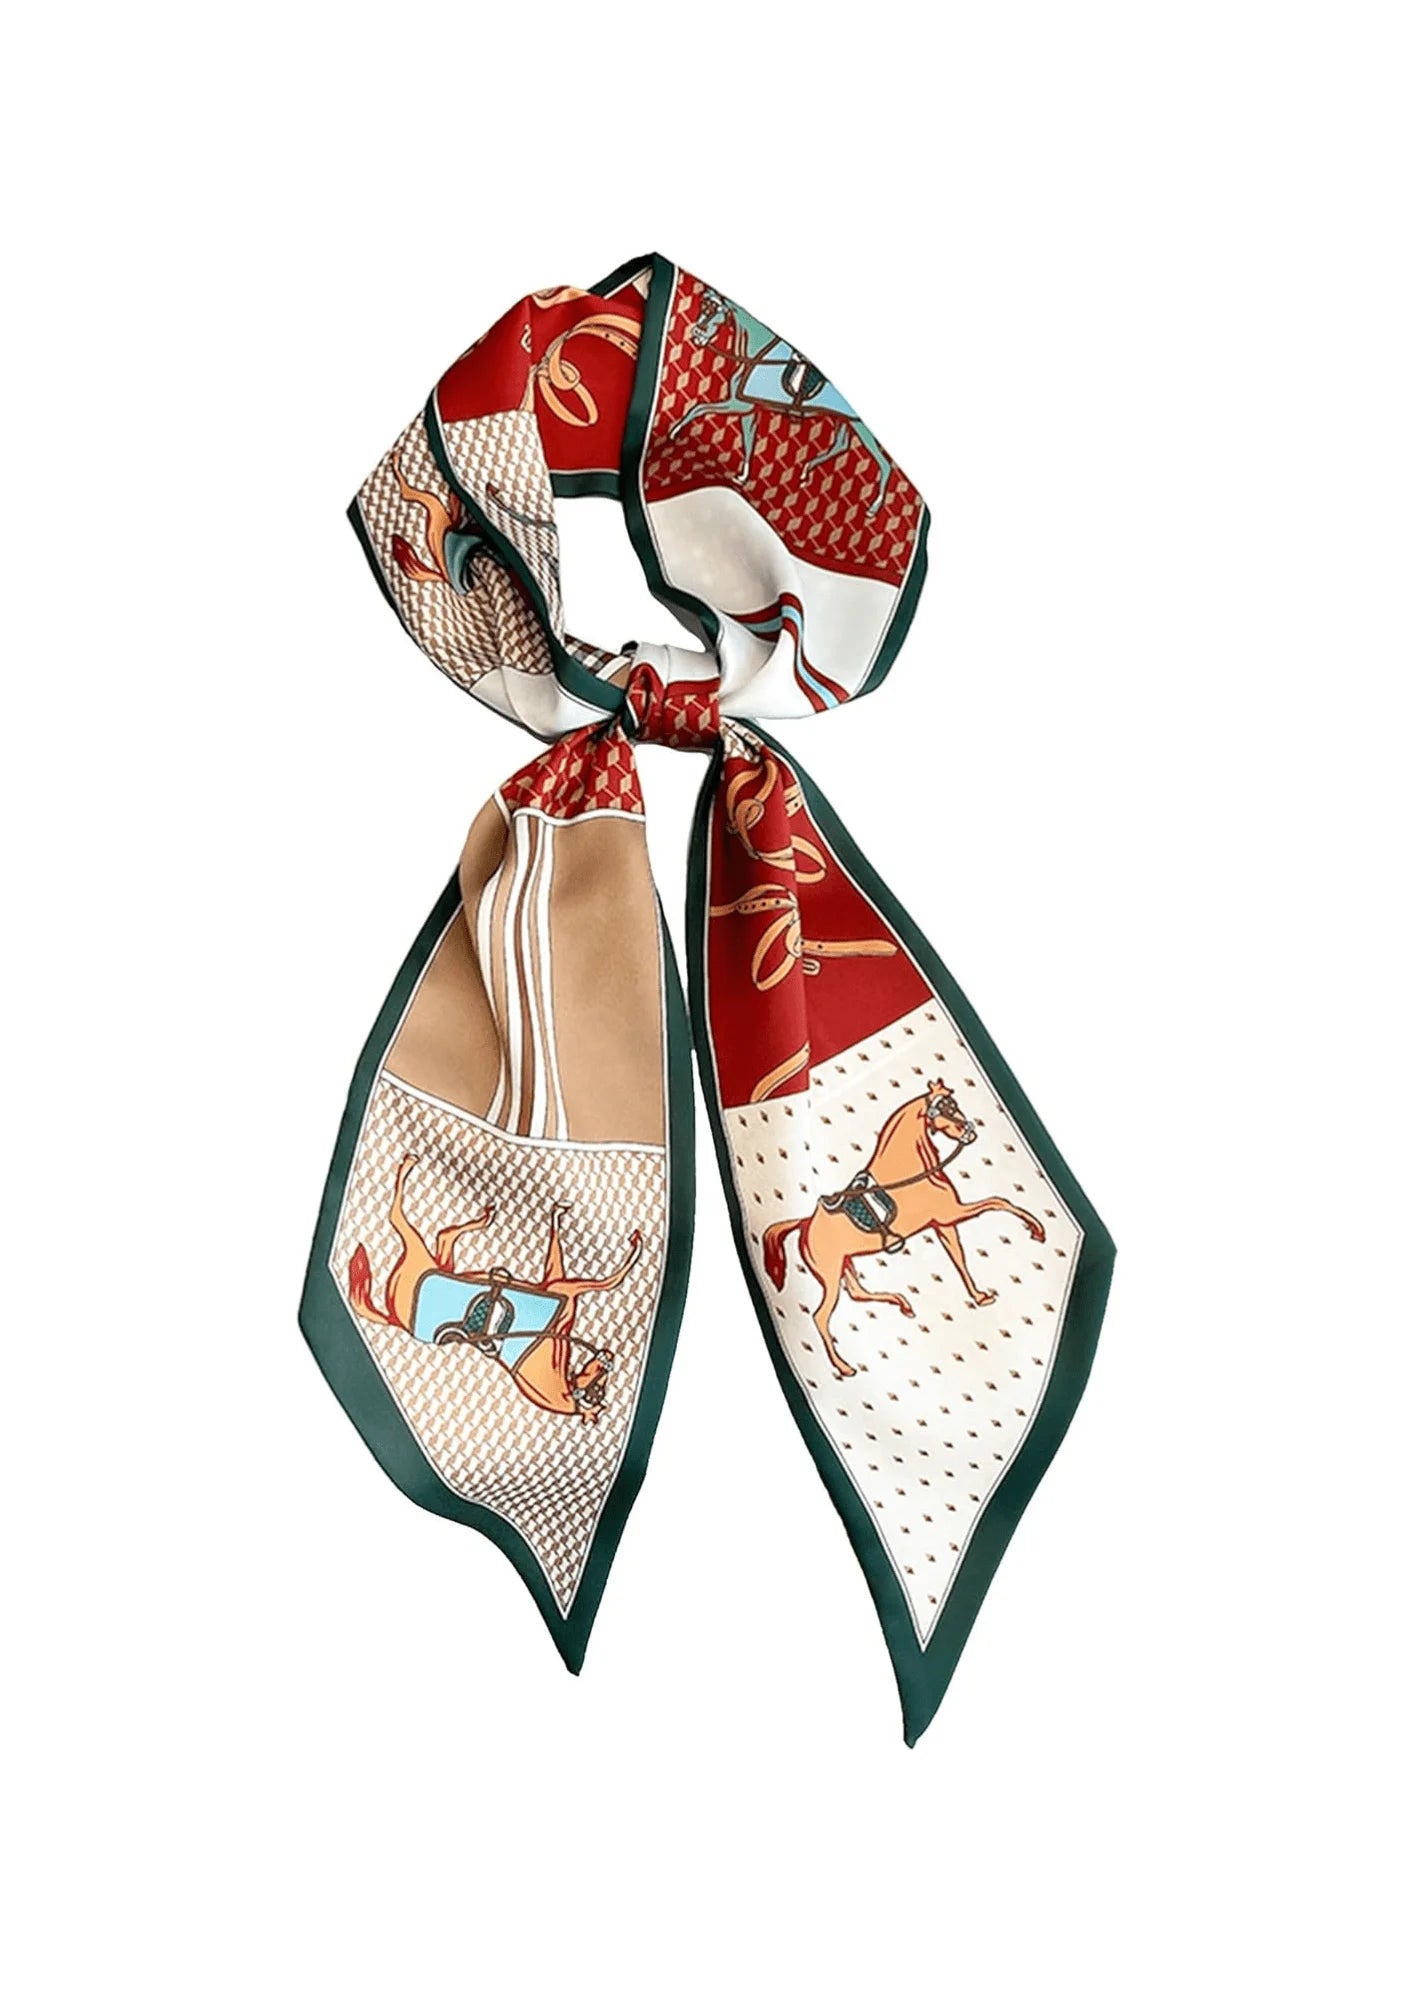 GREEN HORSE-PRINTED SCARF